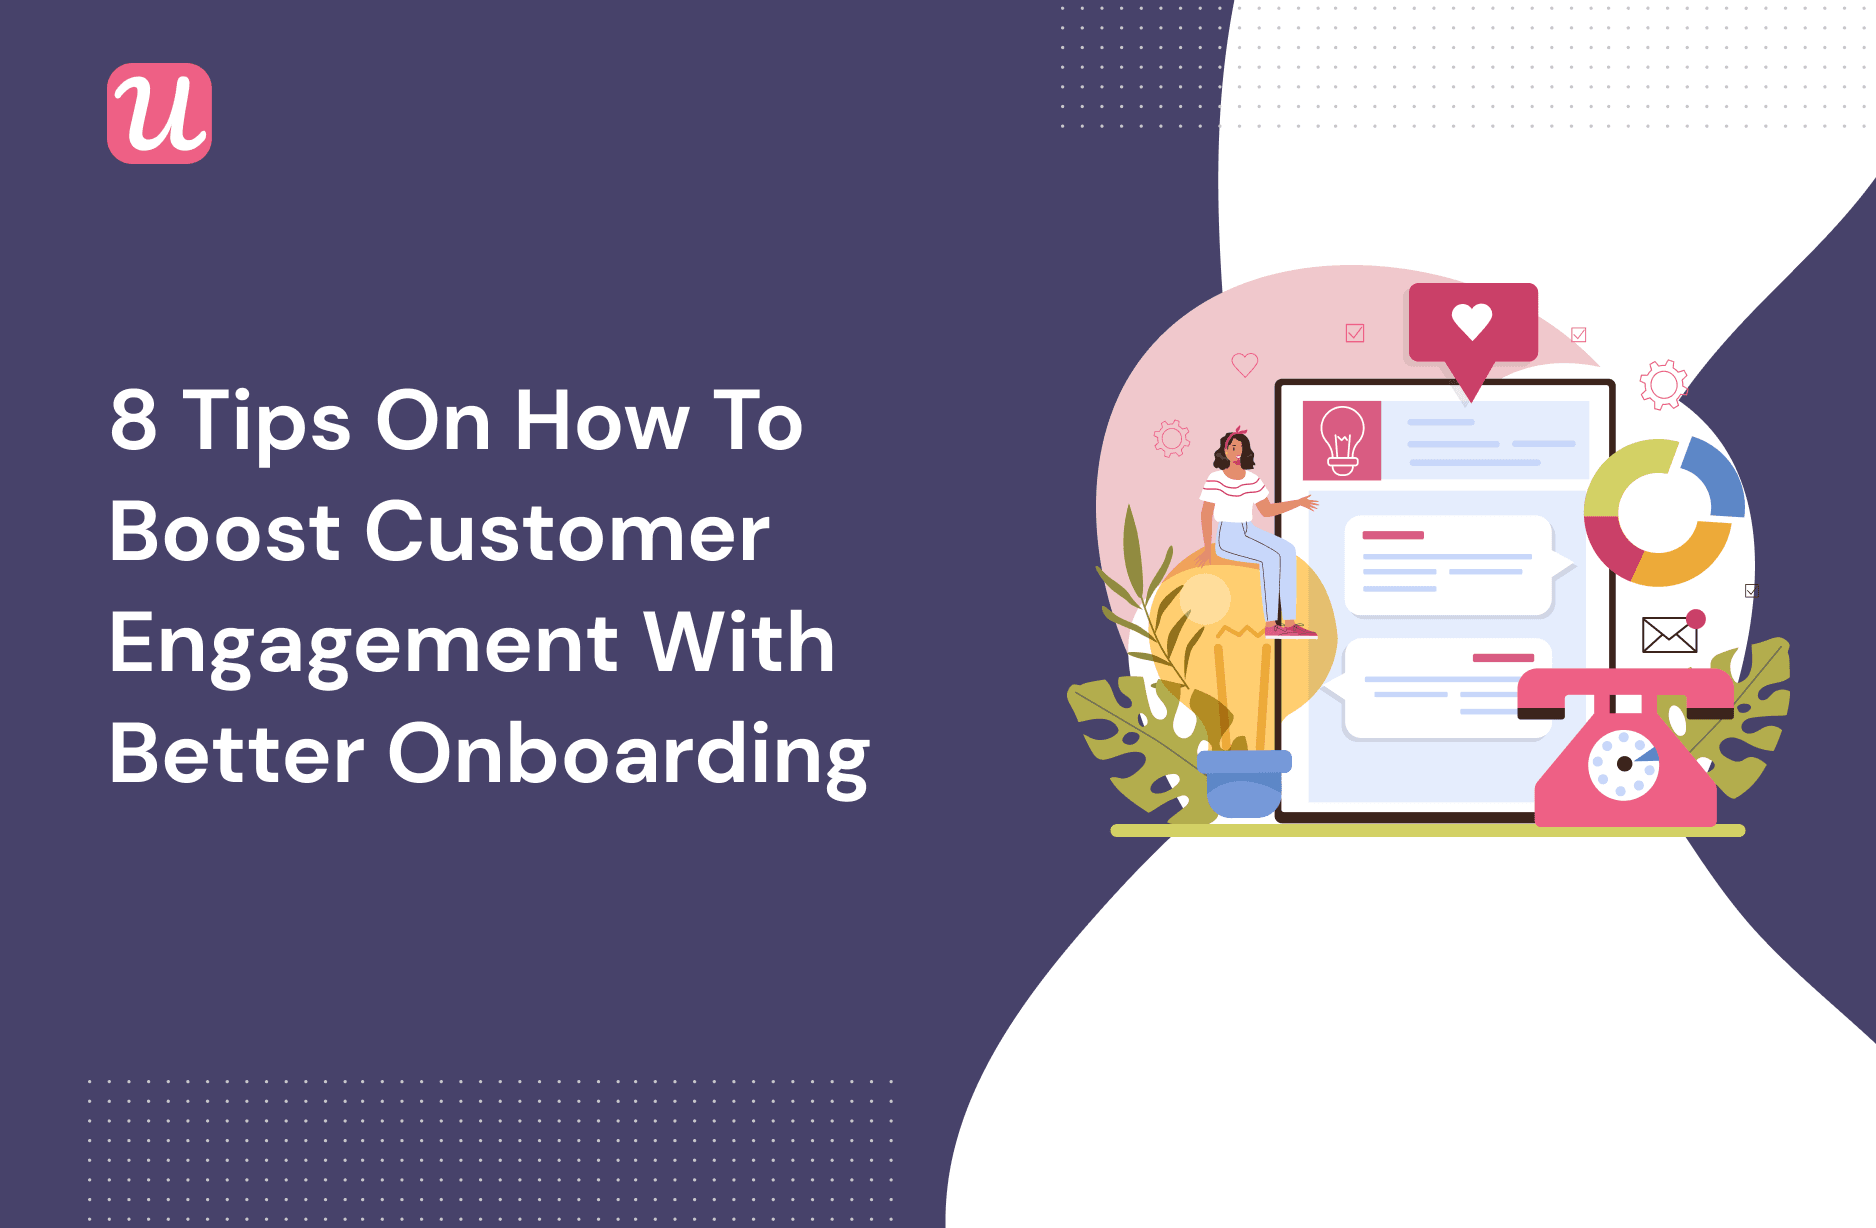 8 Tips On How To Boost Customer Engagement With Better Onboarding